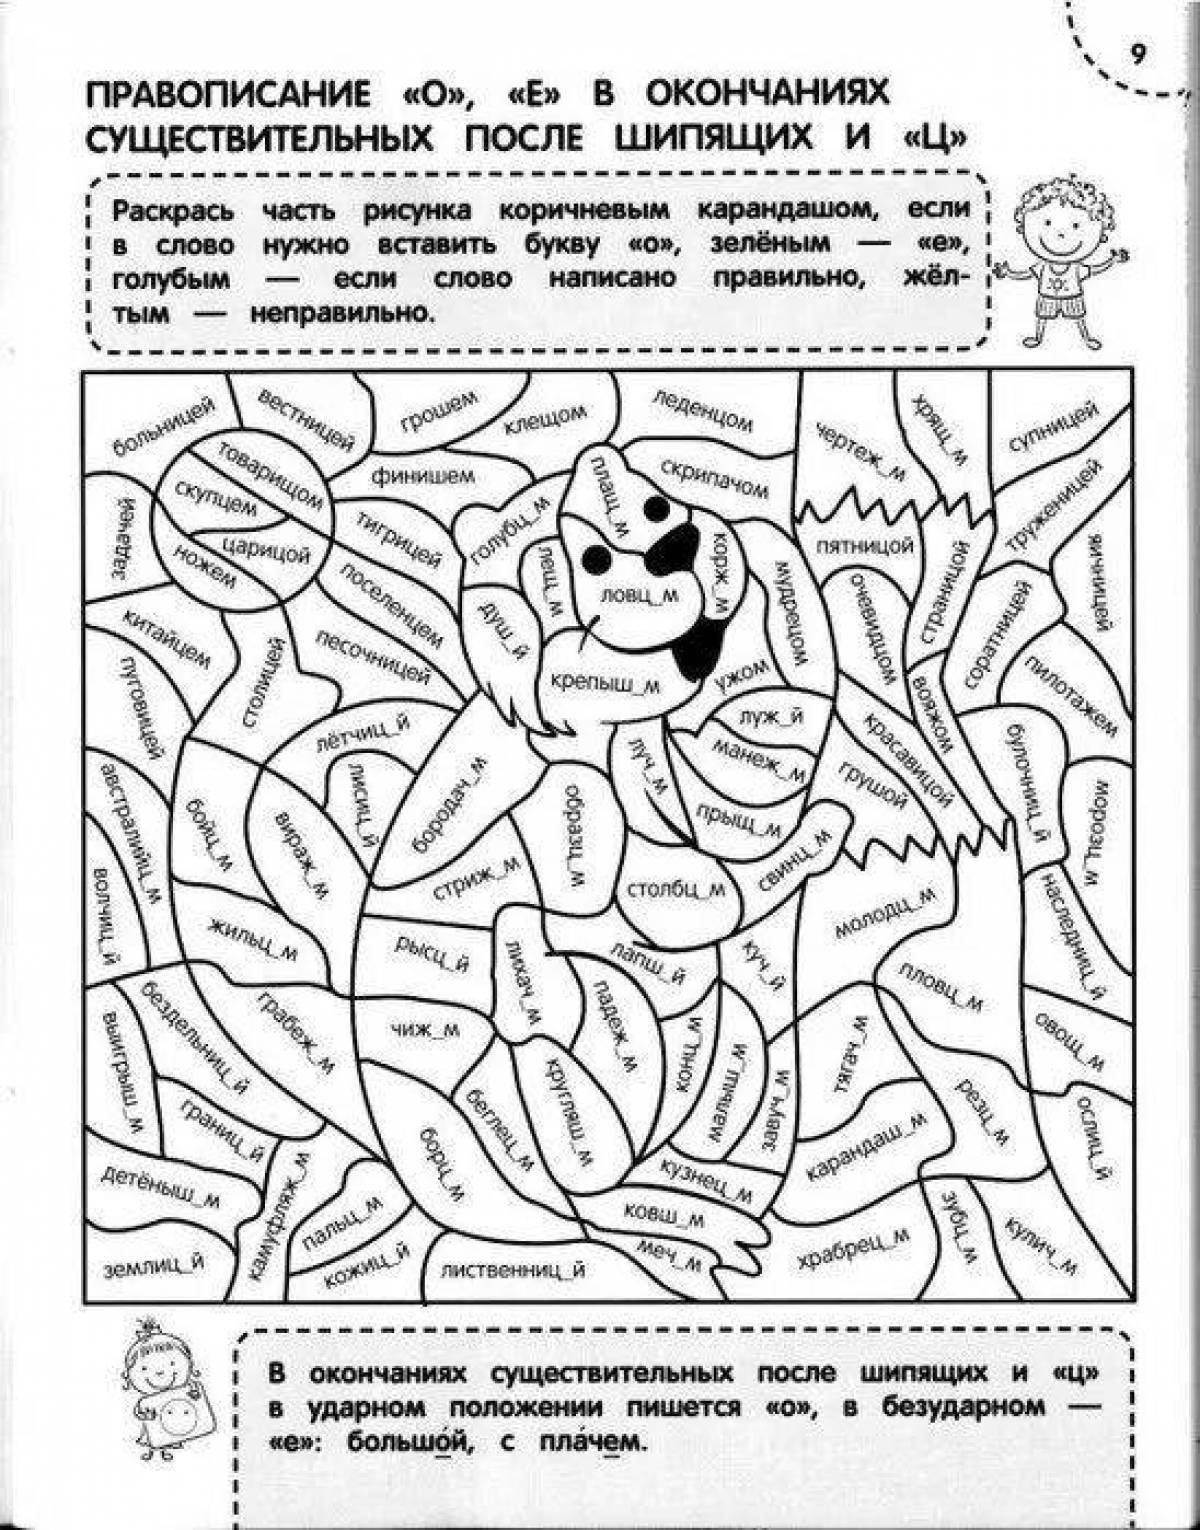 Informative coloring book write without mistakes simulator grade 3